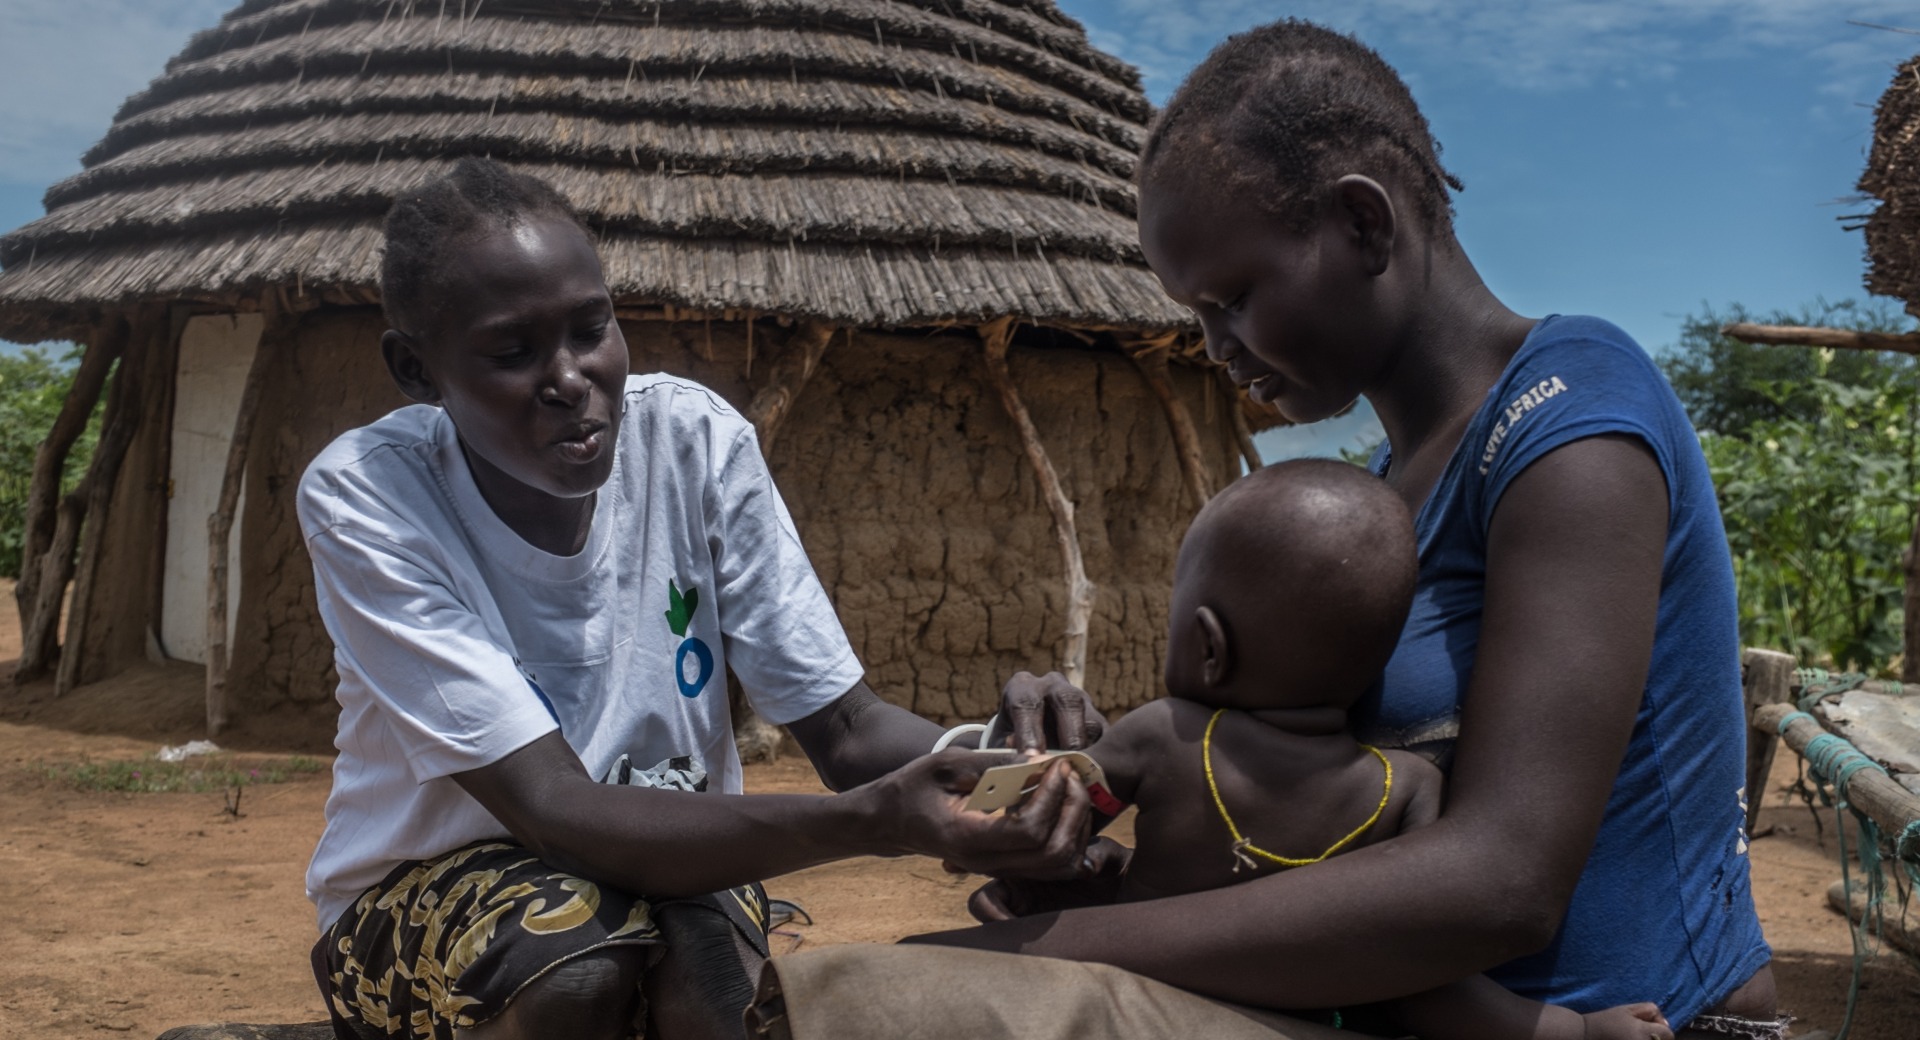 Agawol serves as an Action Against Hunger volunteer in her community. Here, she screens her neighbor's child for malnutrition.